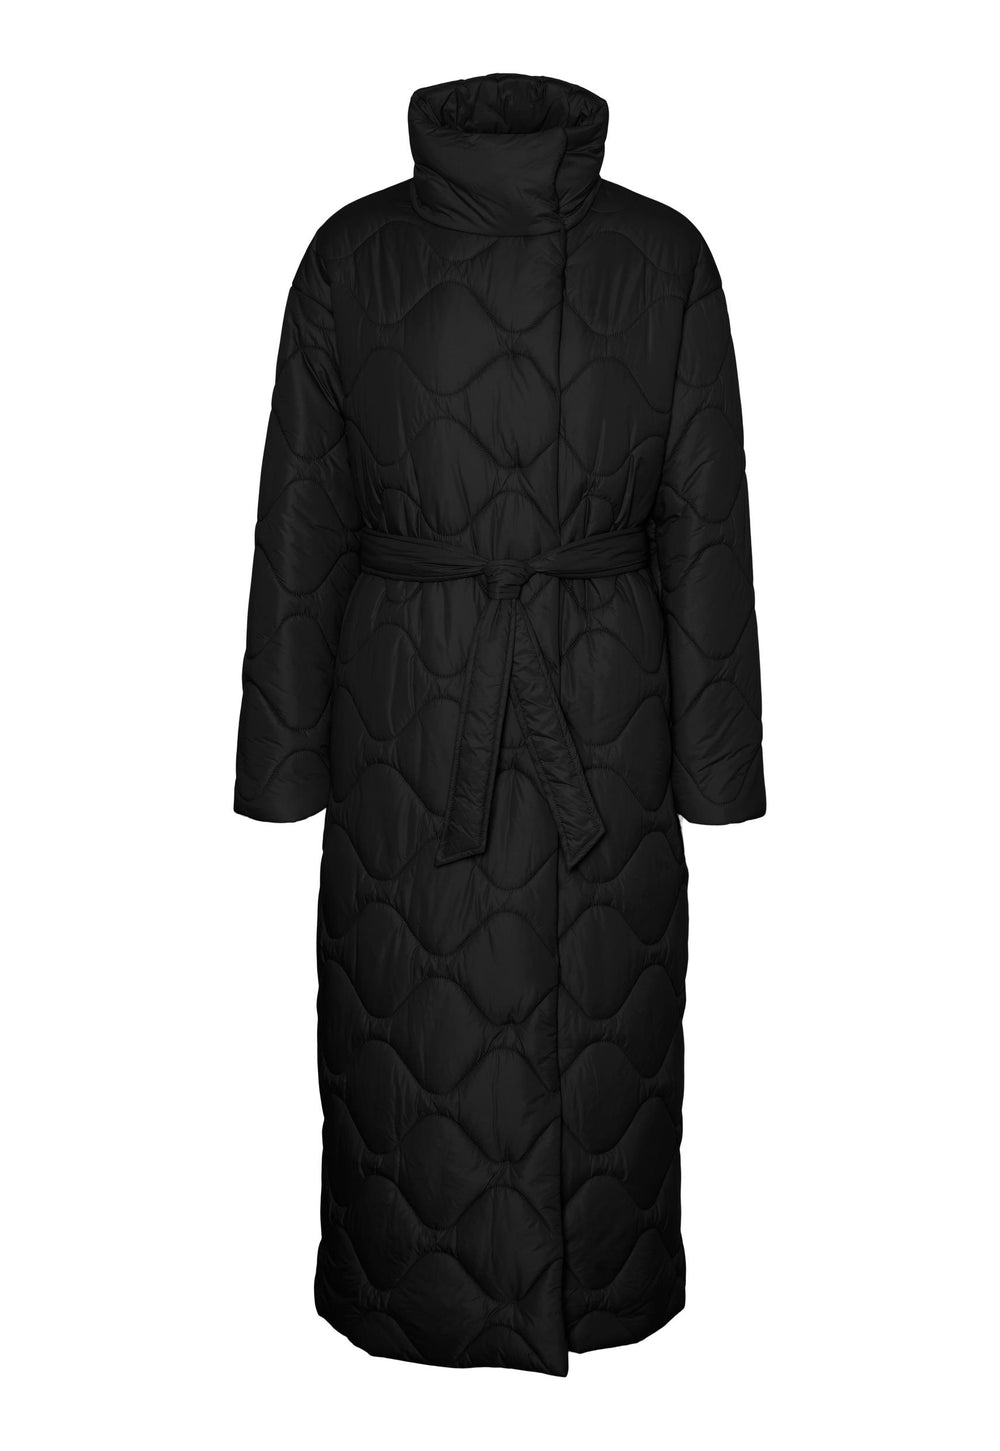 VERO MODA Astoria Onion Quilted Midi Jacket with High Neck & Belt in Black - One Nation Clothing